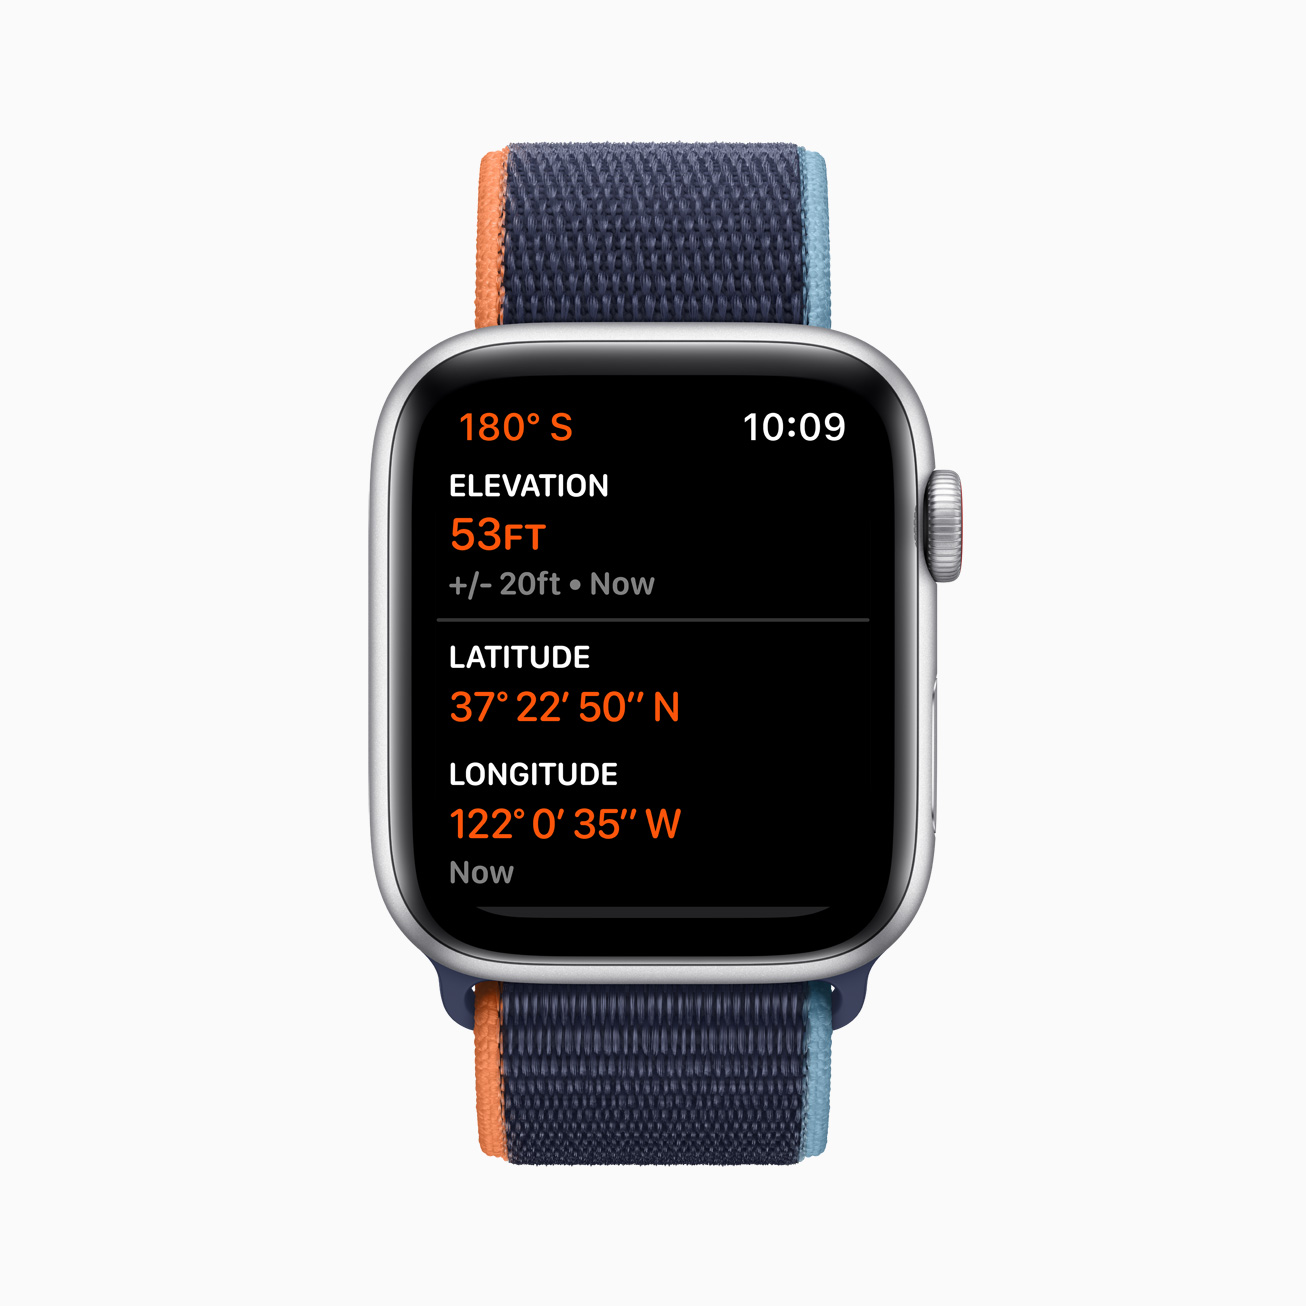 Apple Watch SE The ultimate combination of design, function, and value